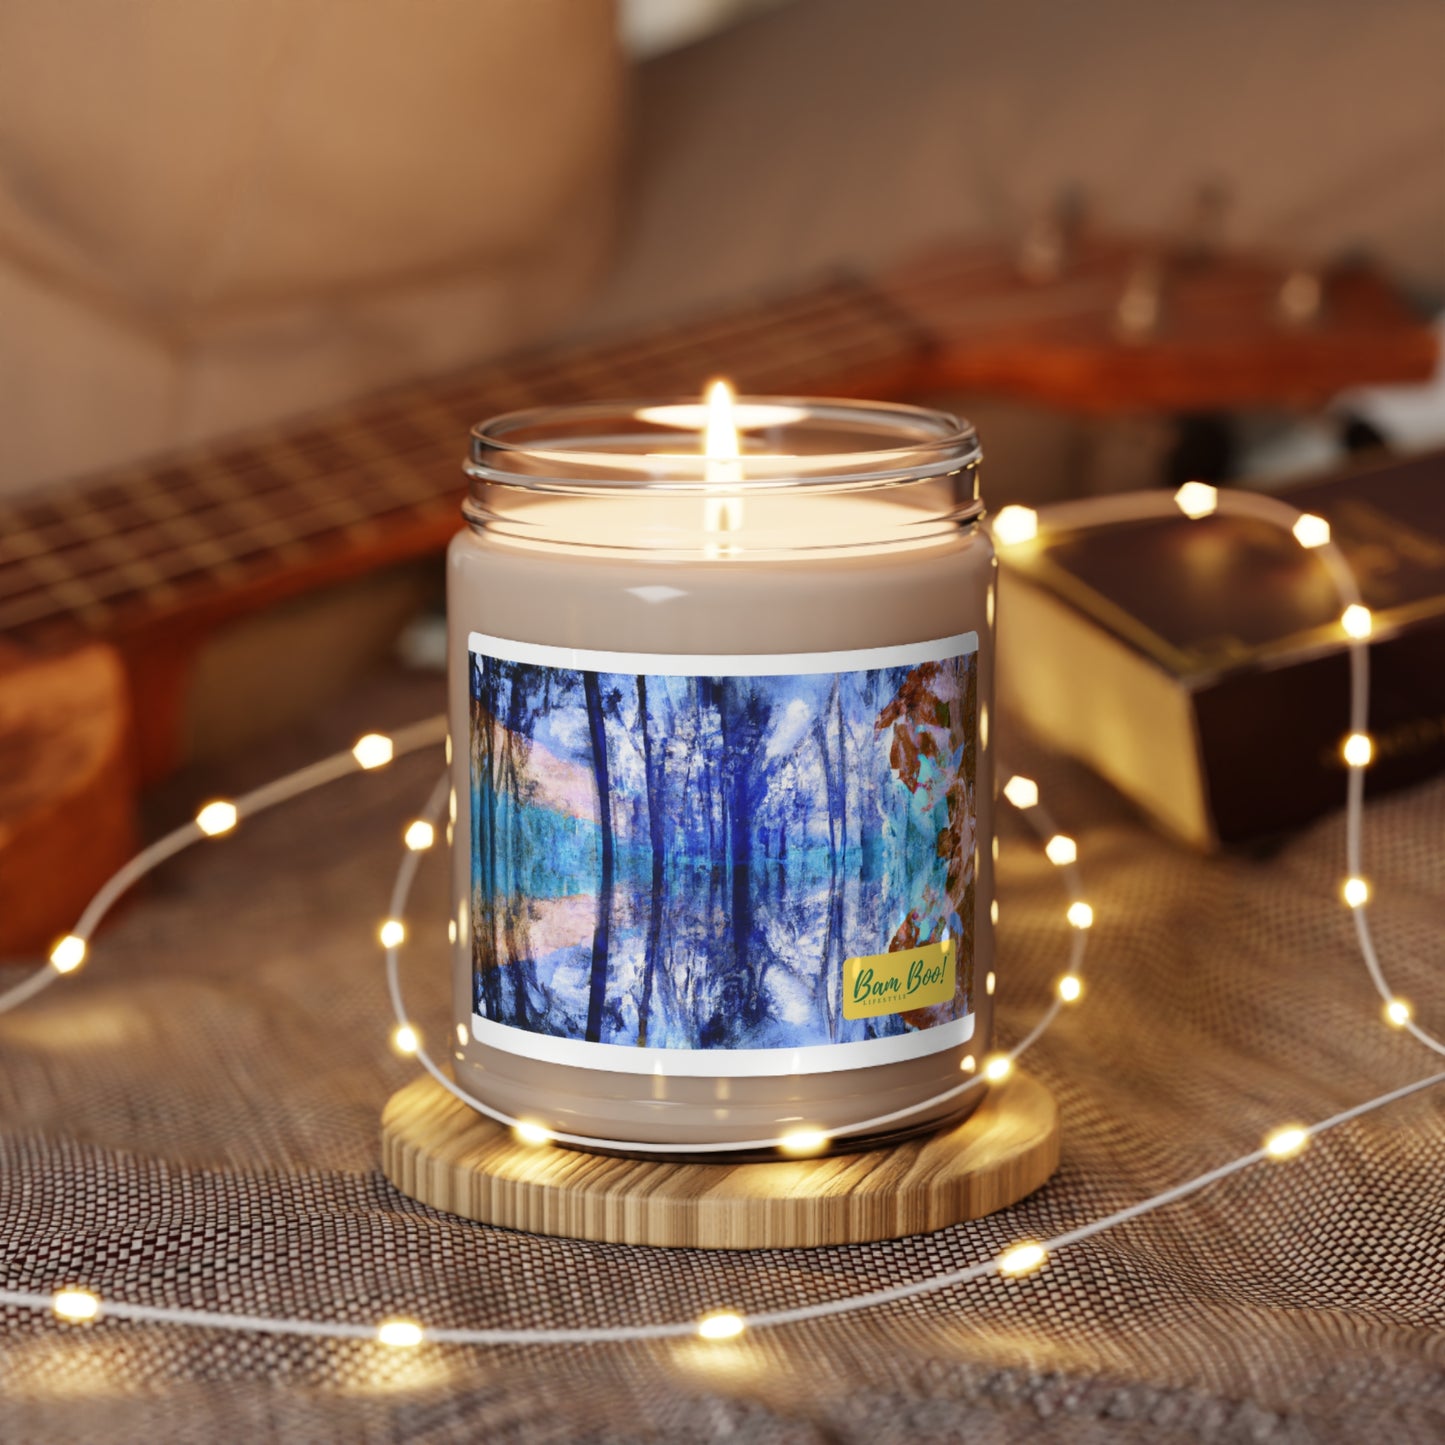 "Nature's Splendor: A Charming Harmony of Images and Colors" - Bam Boo! Lifestyle Eco-friendly Soy Candle